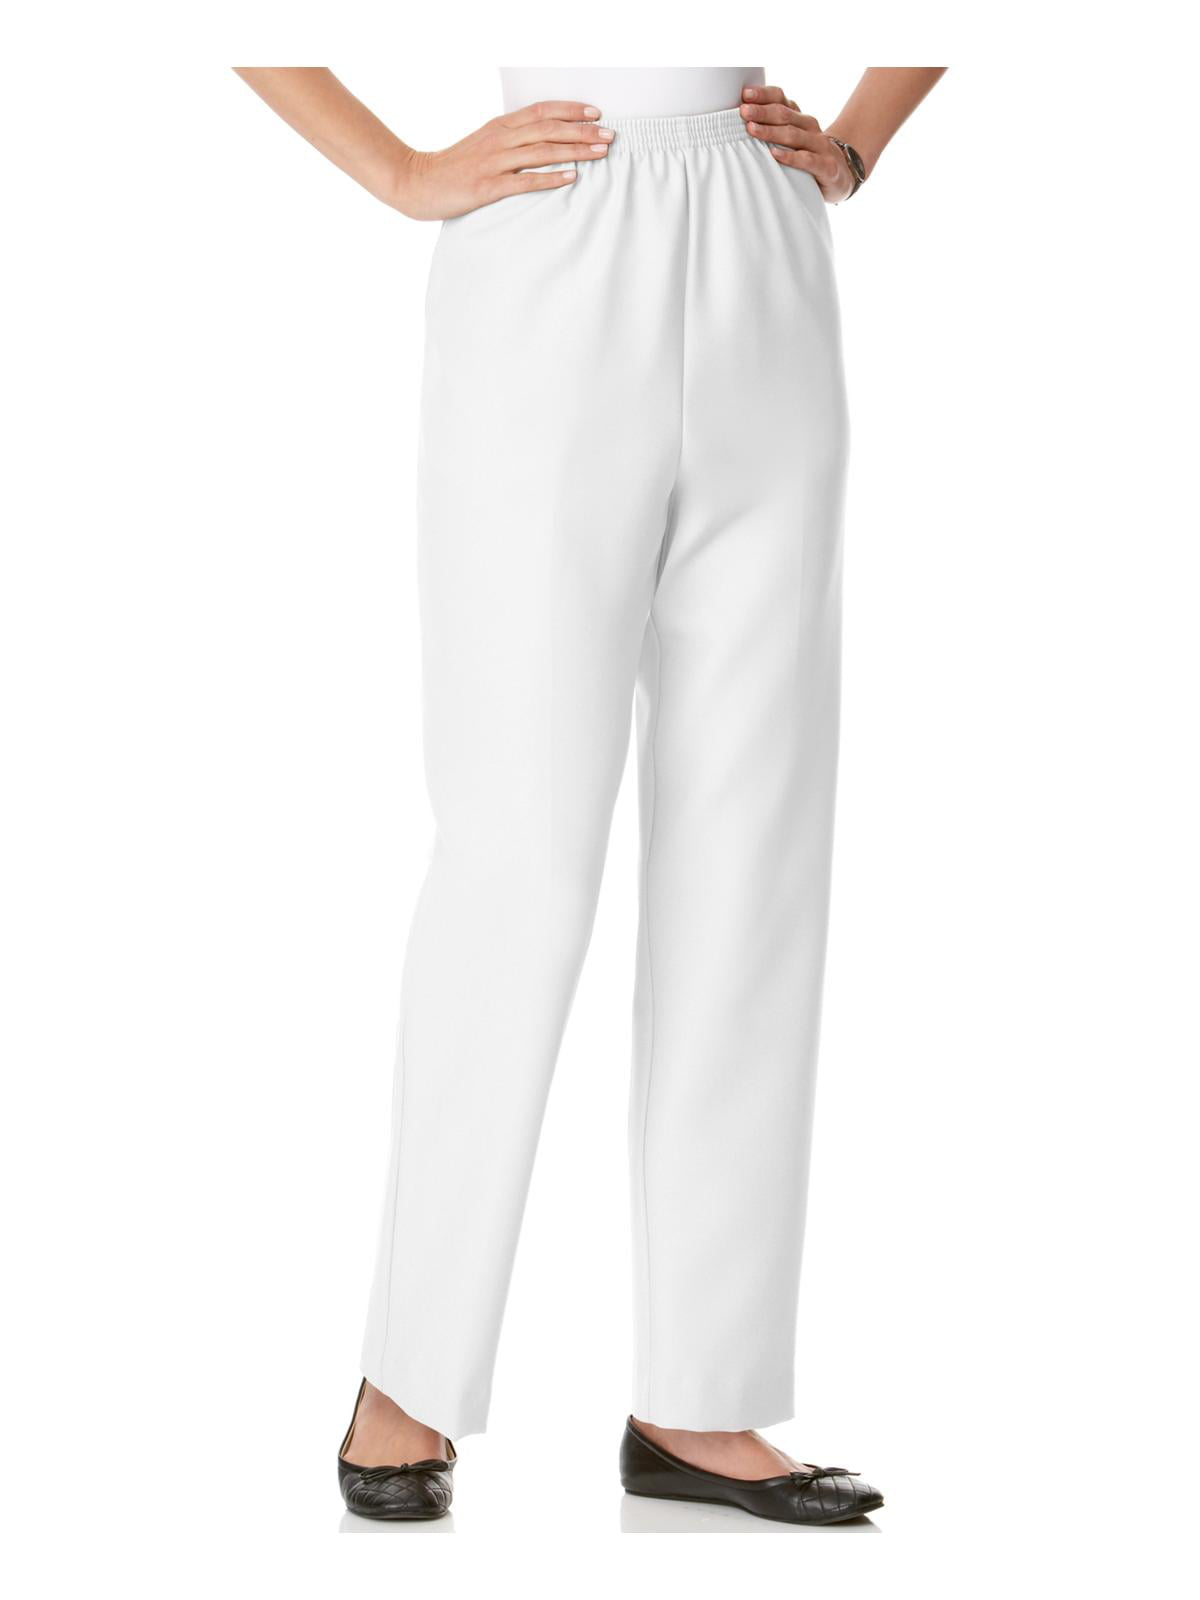 Alfred Dunner Womens Petite Poly Proportioned Medium Pant